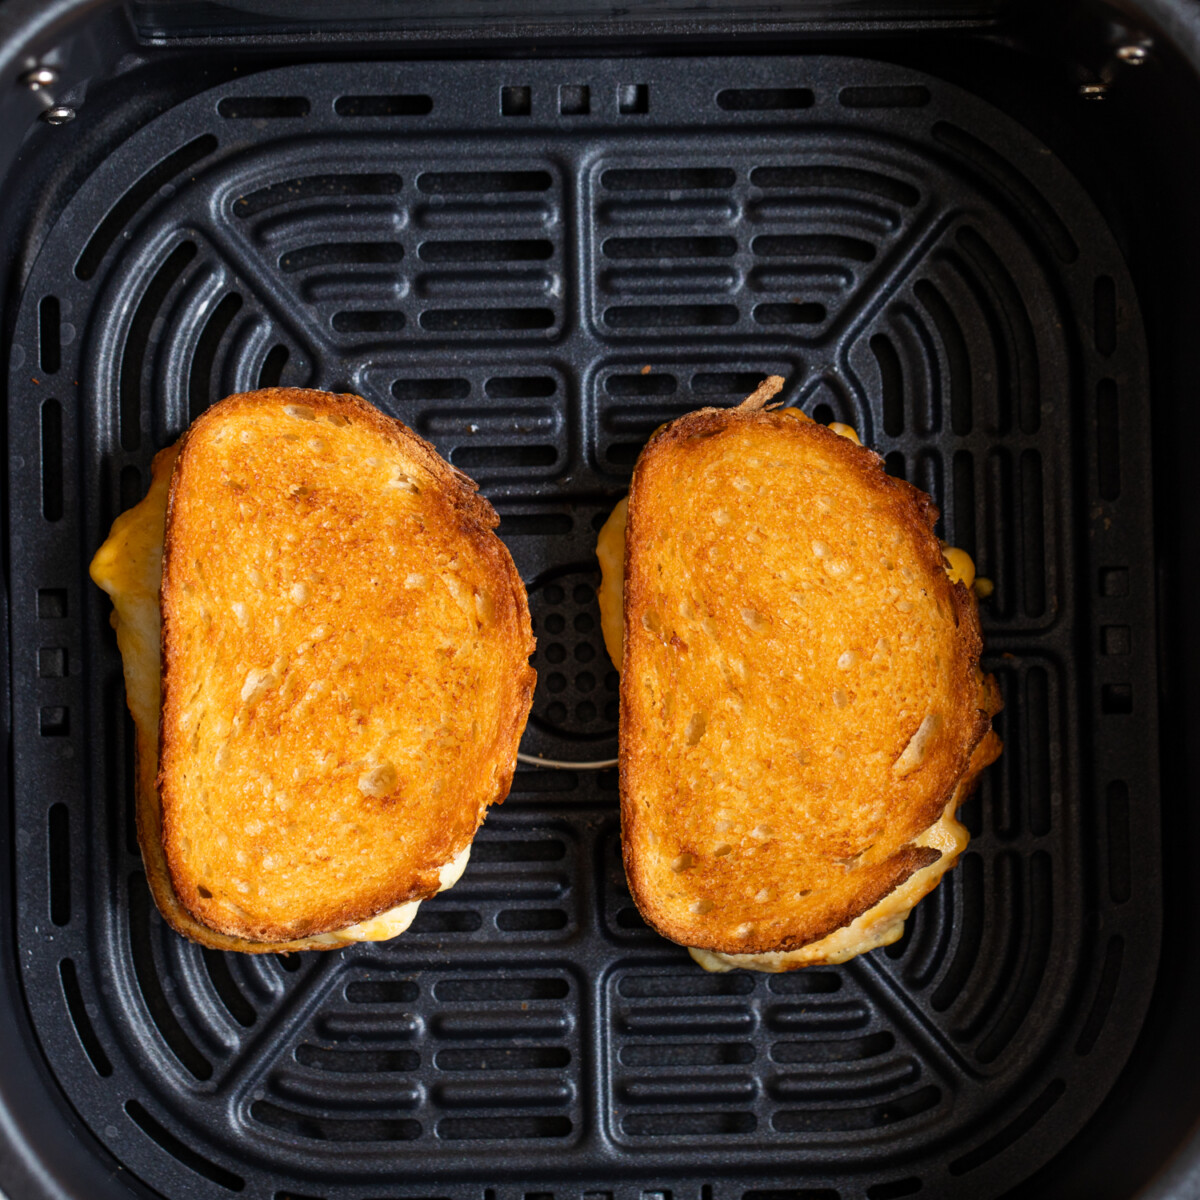 Cooking two grilled cheese sandwiches in an air fryer.